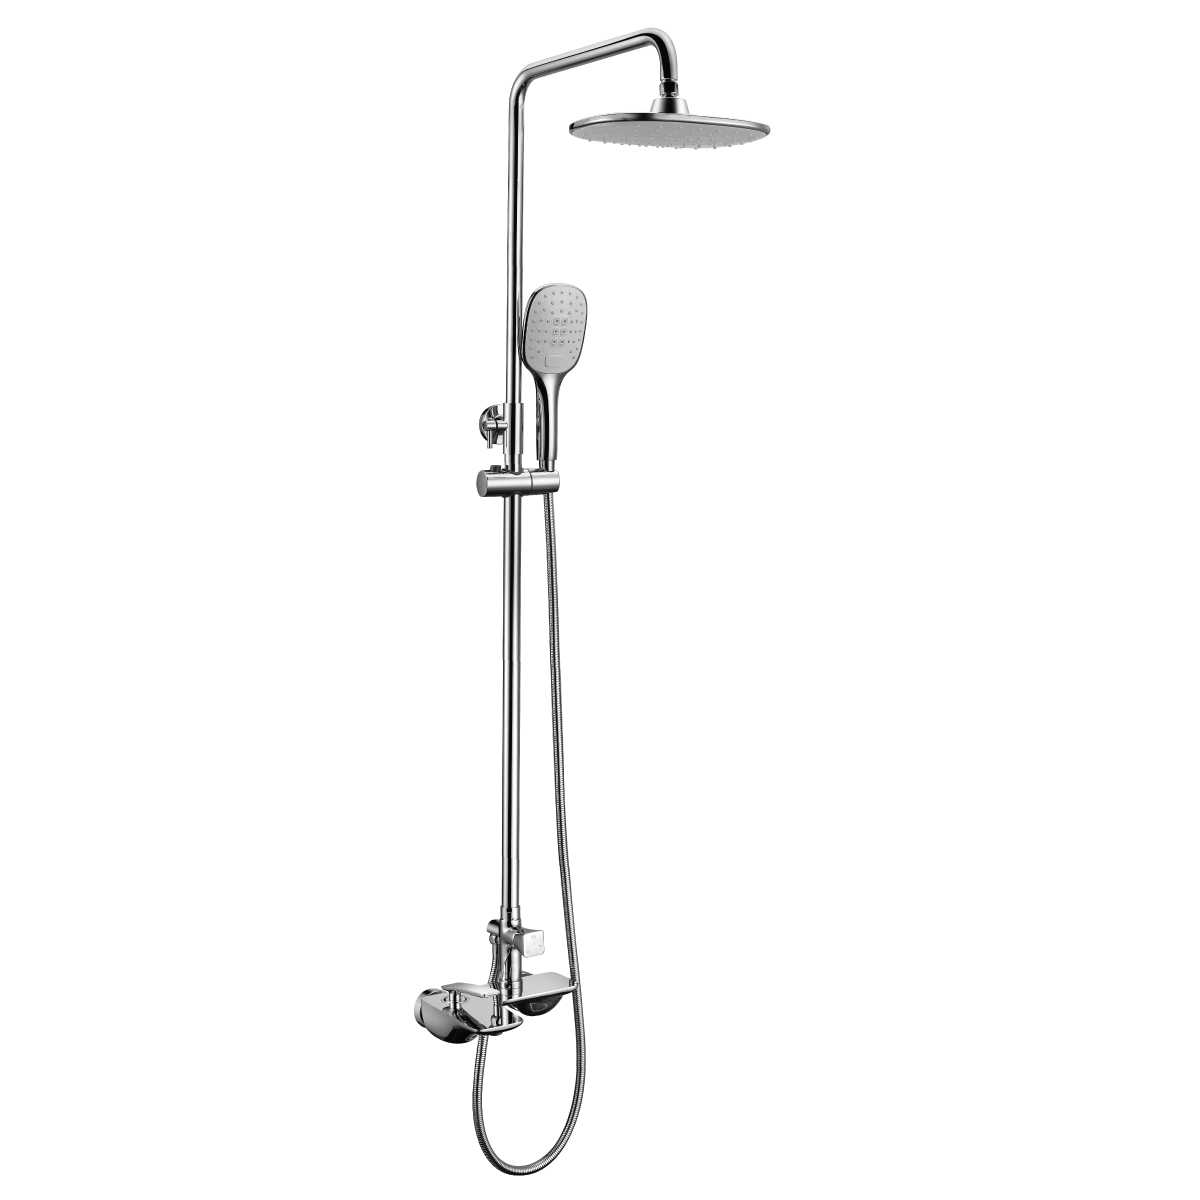 LM6862C Bath and shower faucet with adjustable rod height, non-swivel spout and «Tropical rain» shower head